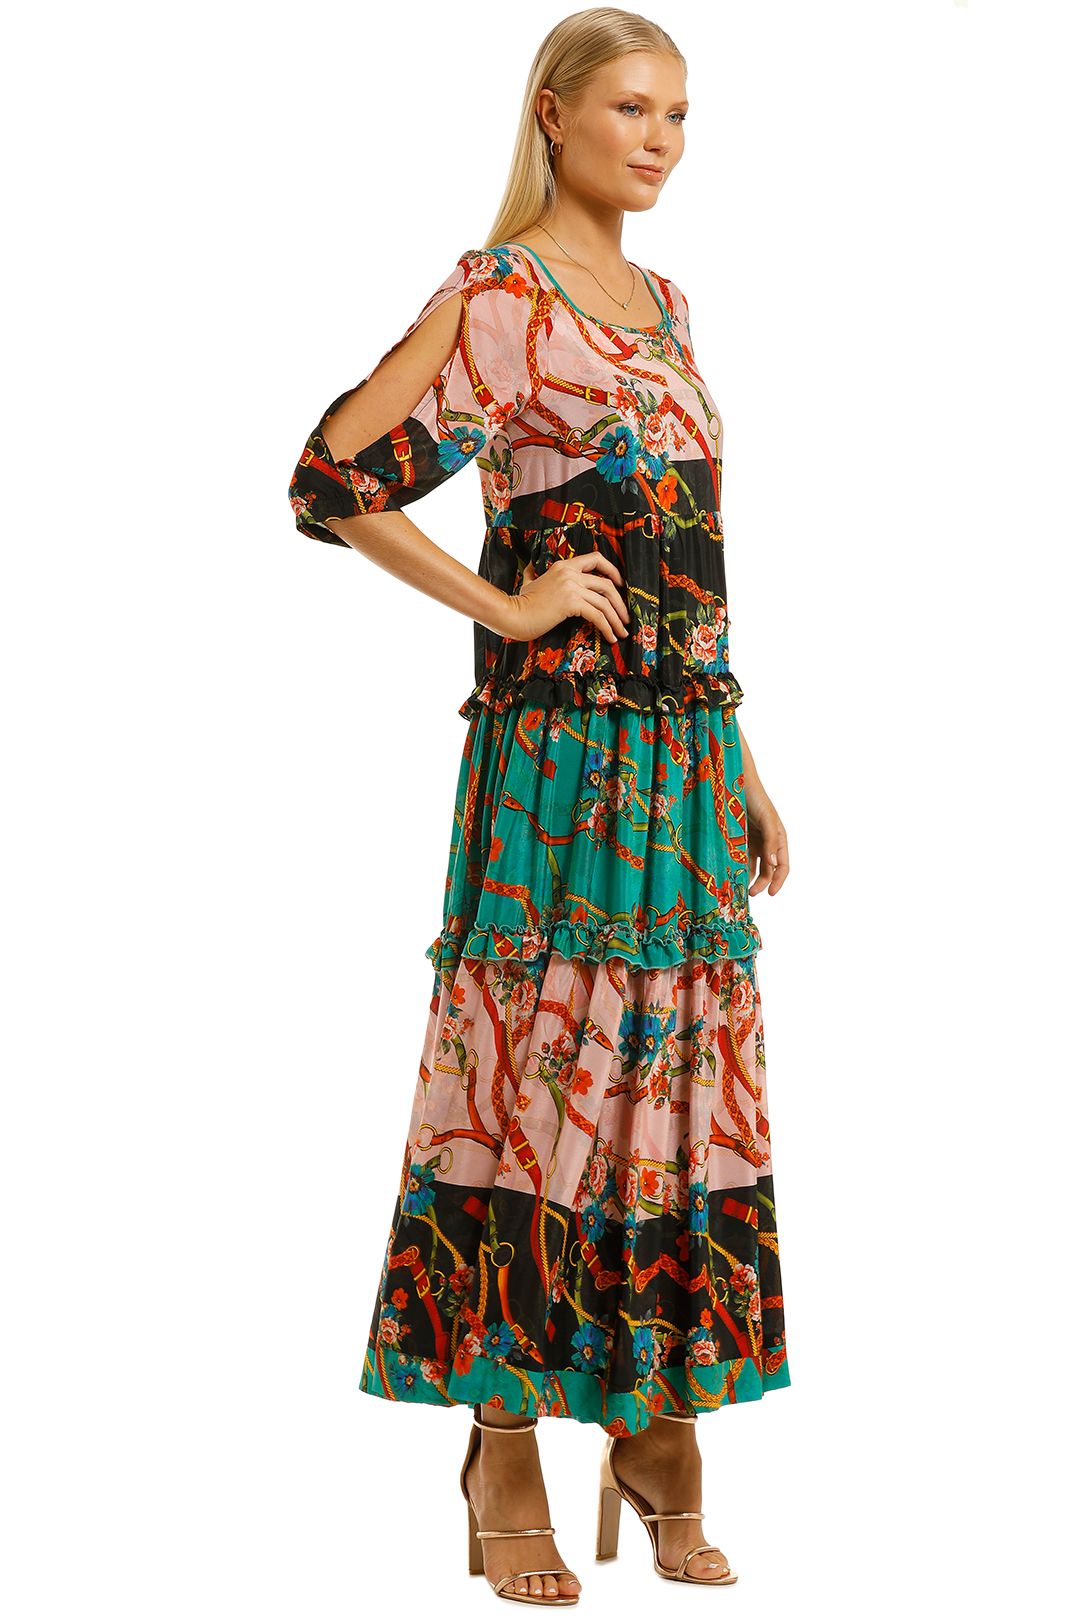 Frill For All Dress in Multi Print by Cooper By Trelise Cooper for Hire